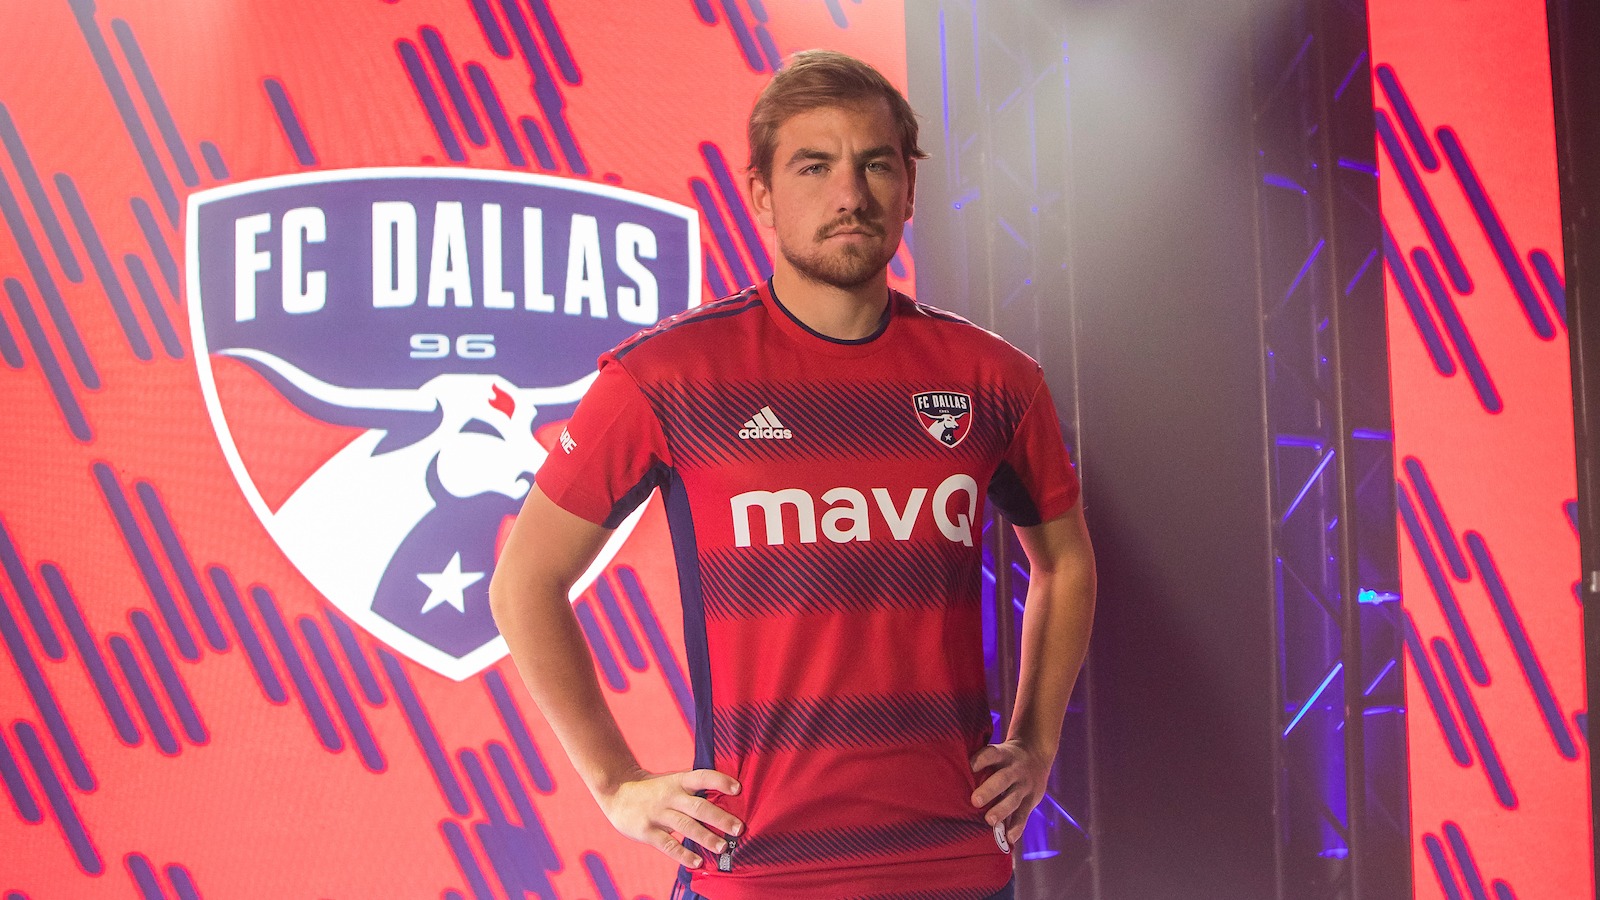 Adidas MLS FC Dallas Home 2021 Jersey Size M Soccer Football Club for sale  online